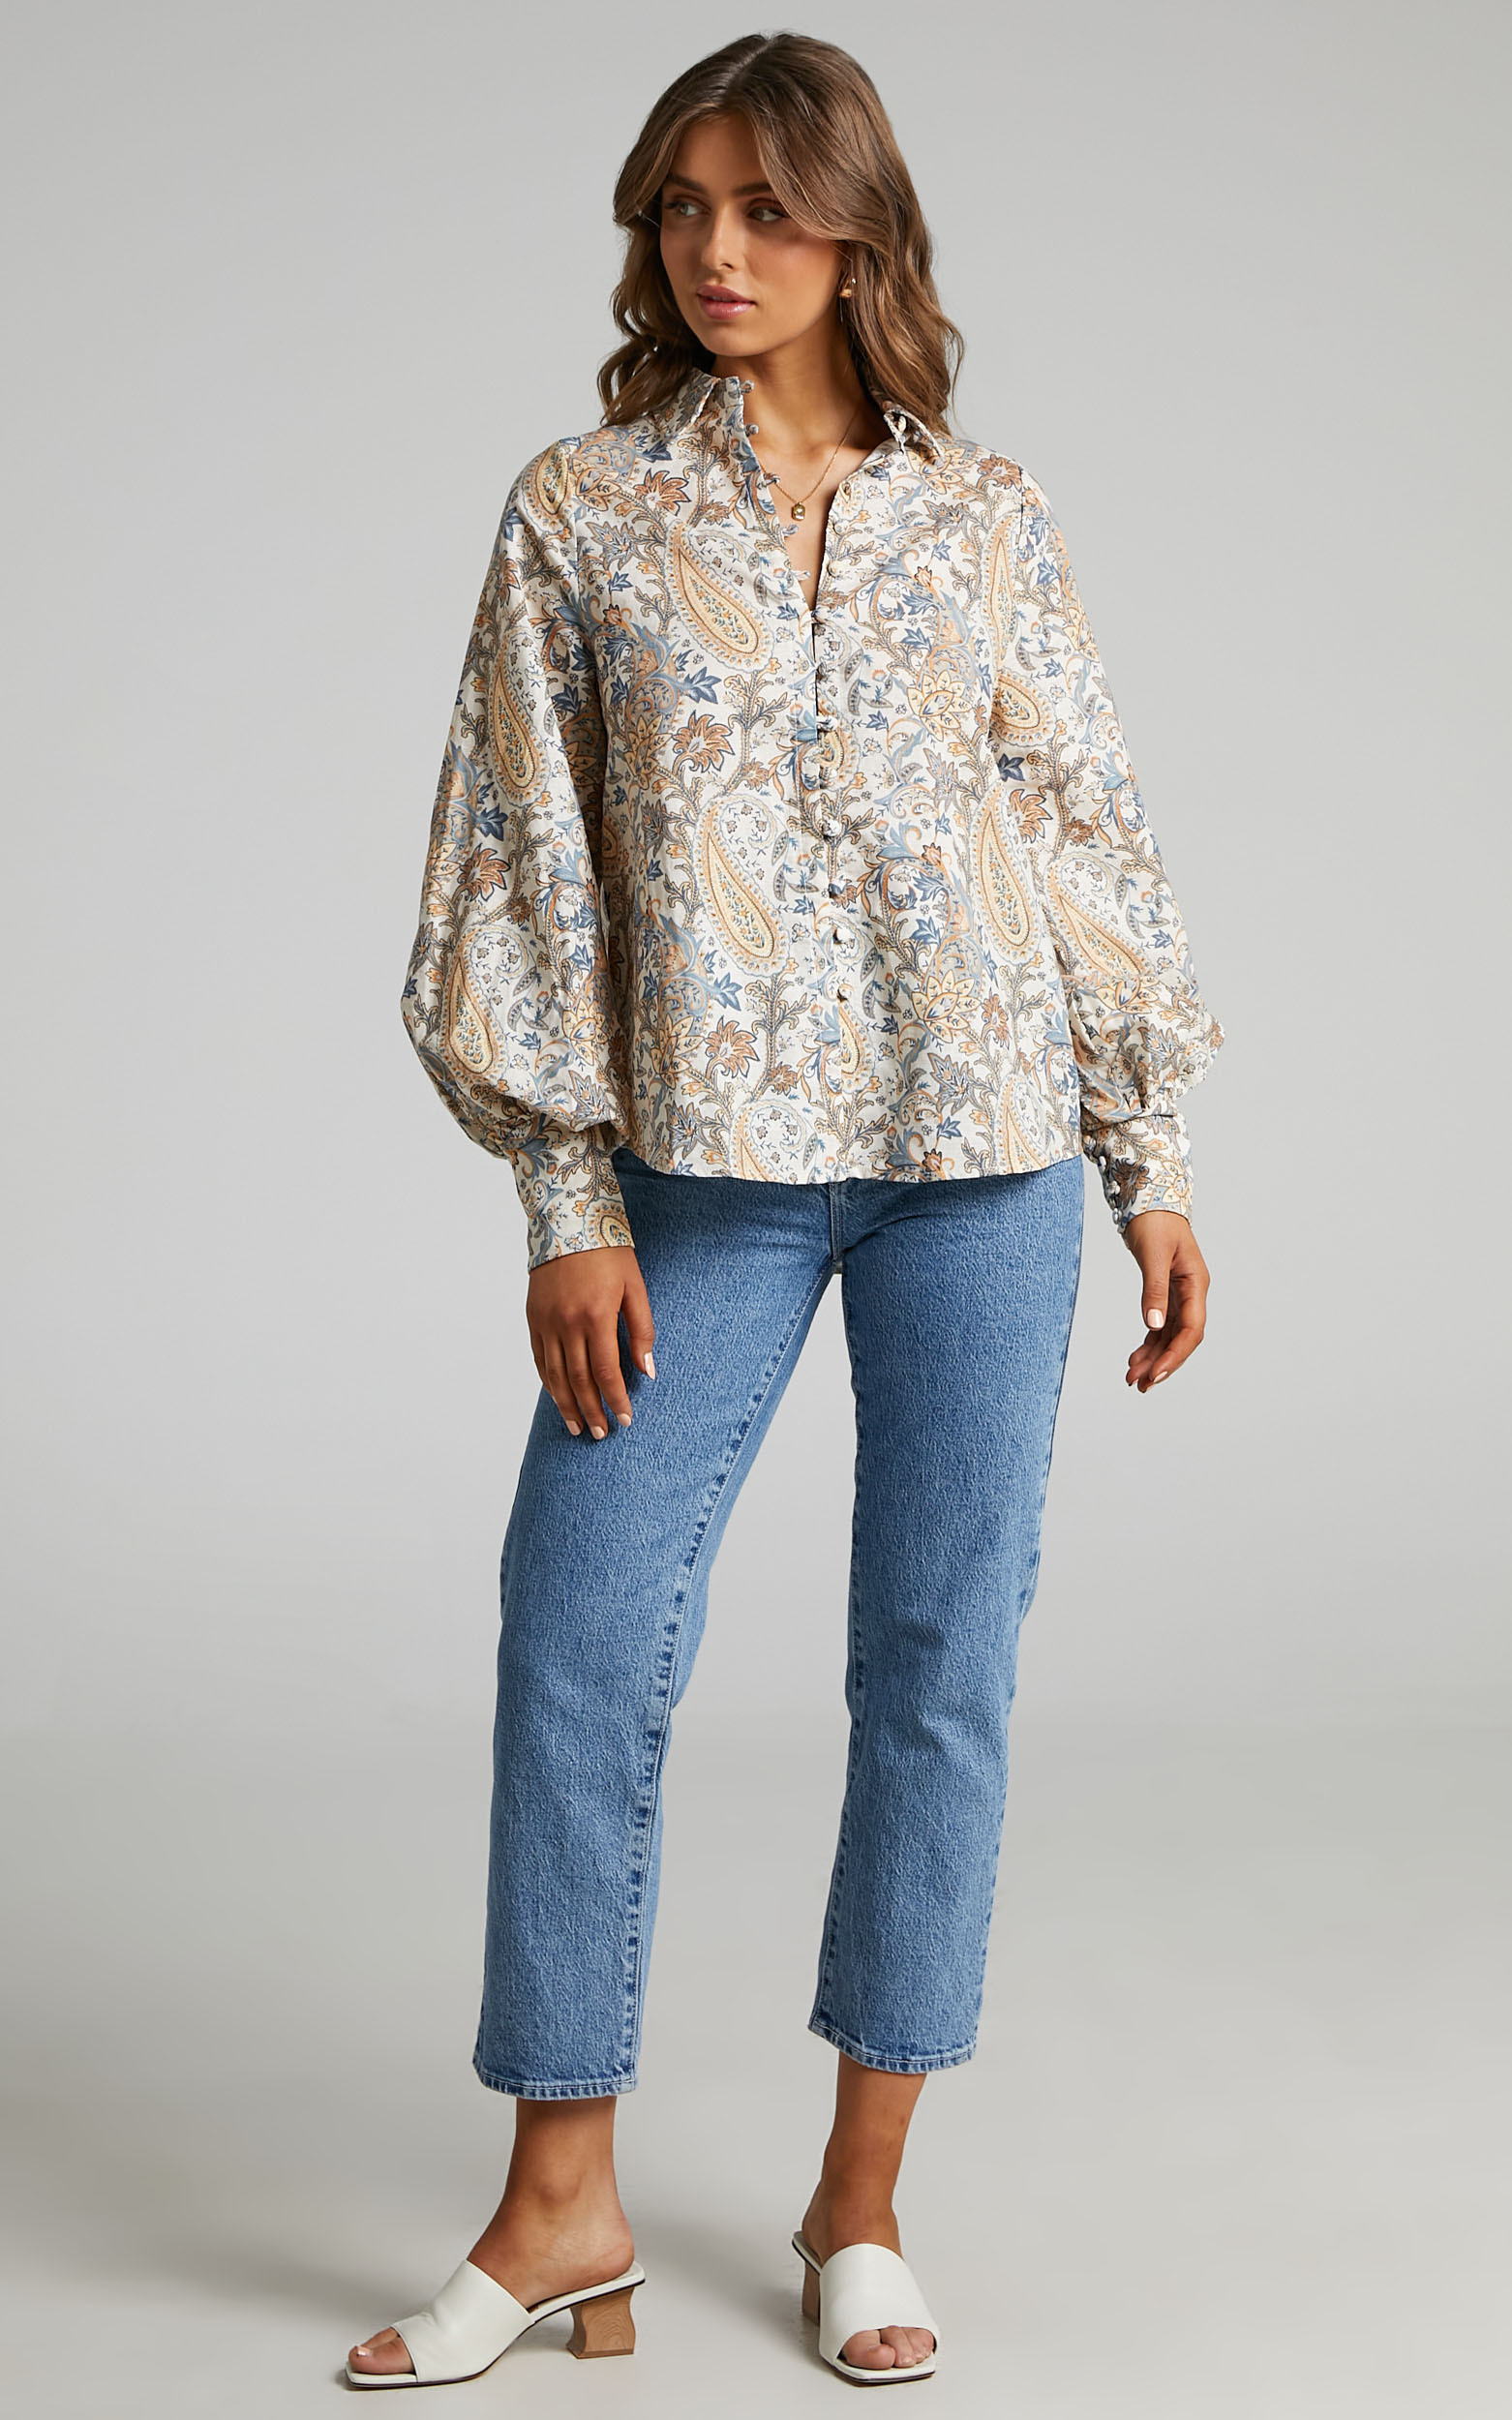 Charlie Holiday - Harmony Shirt in Paisley - L, MLT1, hi-res image number null